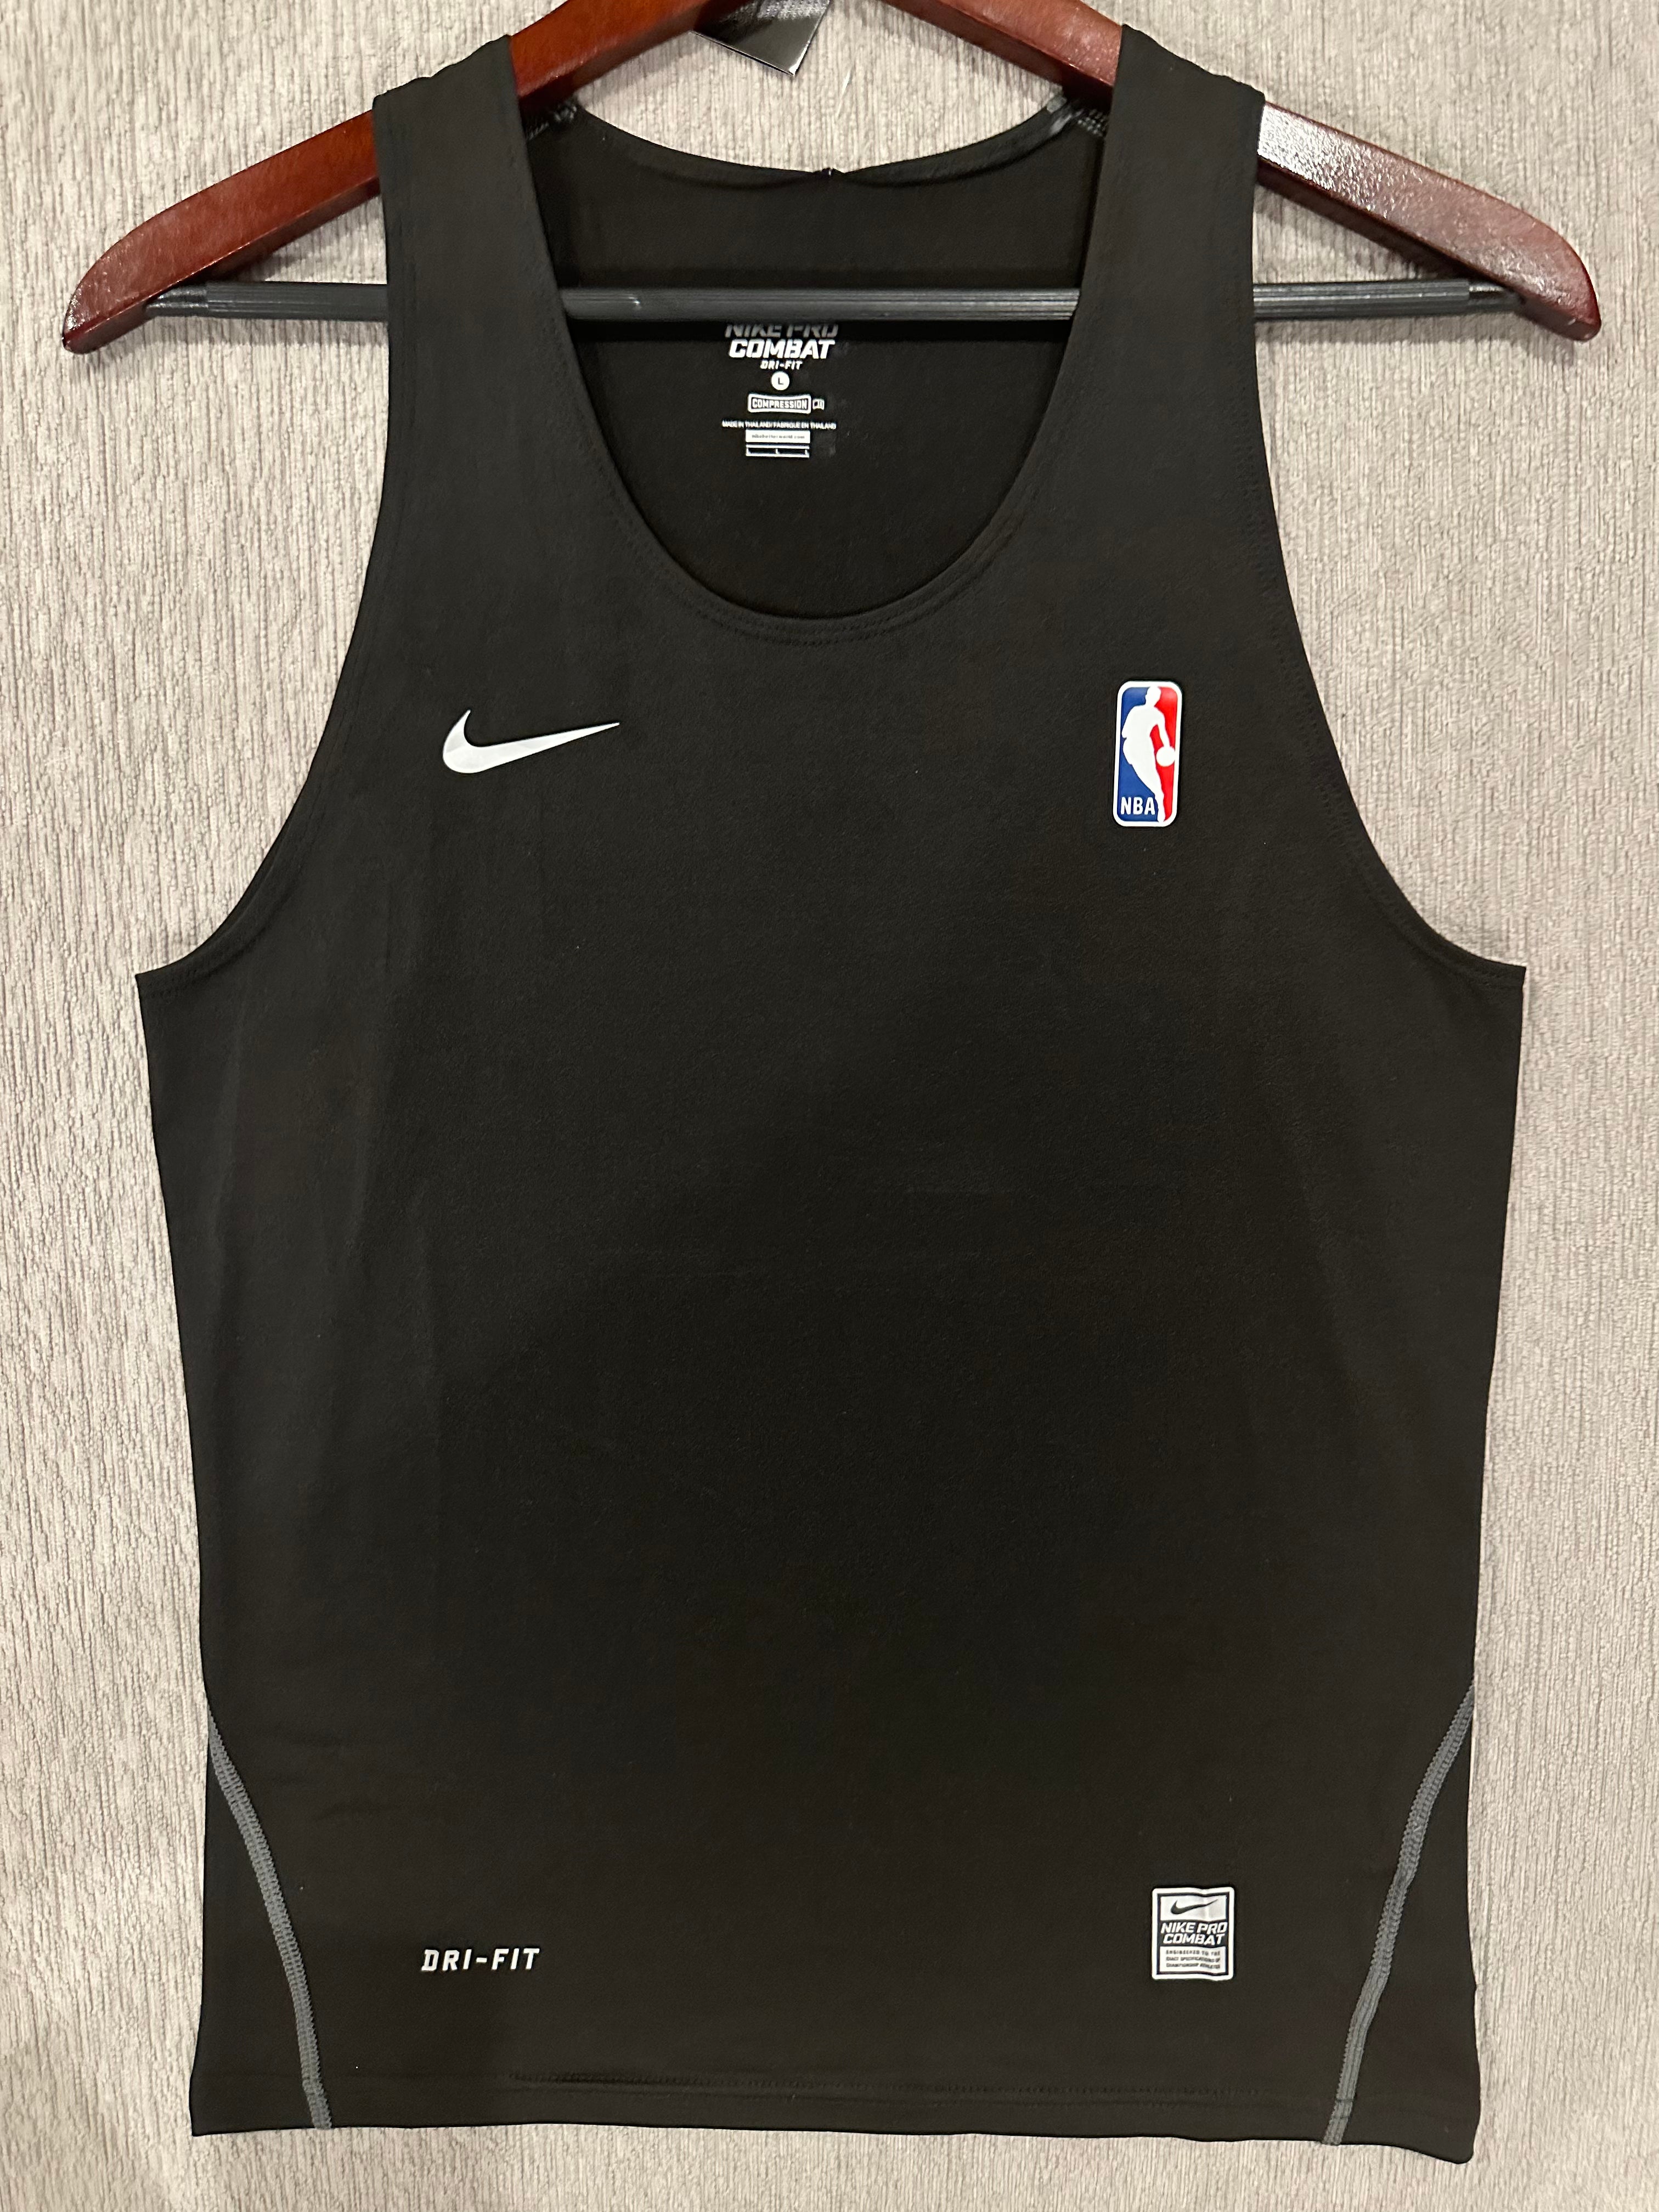 NIKE PRO NBA Team Issue Compression 3/4 Tight Black And White Size 2XLT for  Sale in Phoenix, AZ - OfferUp